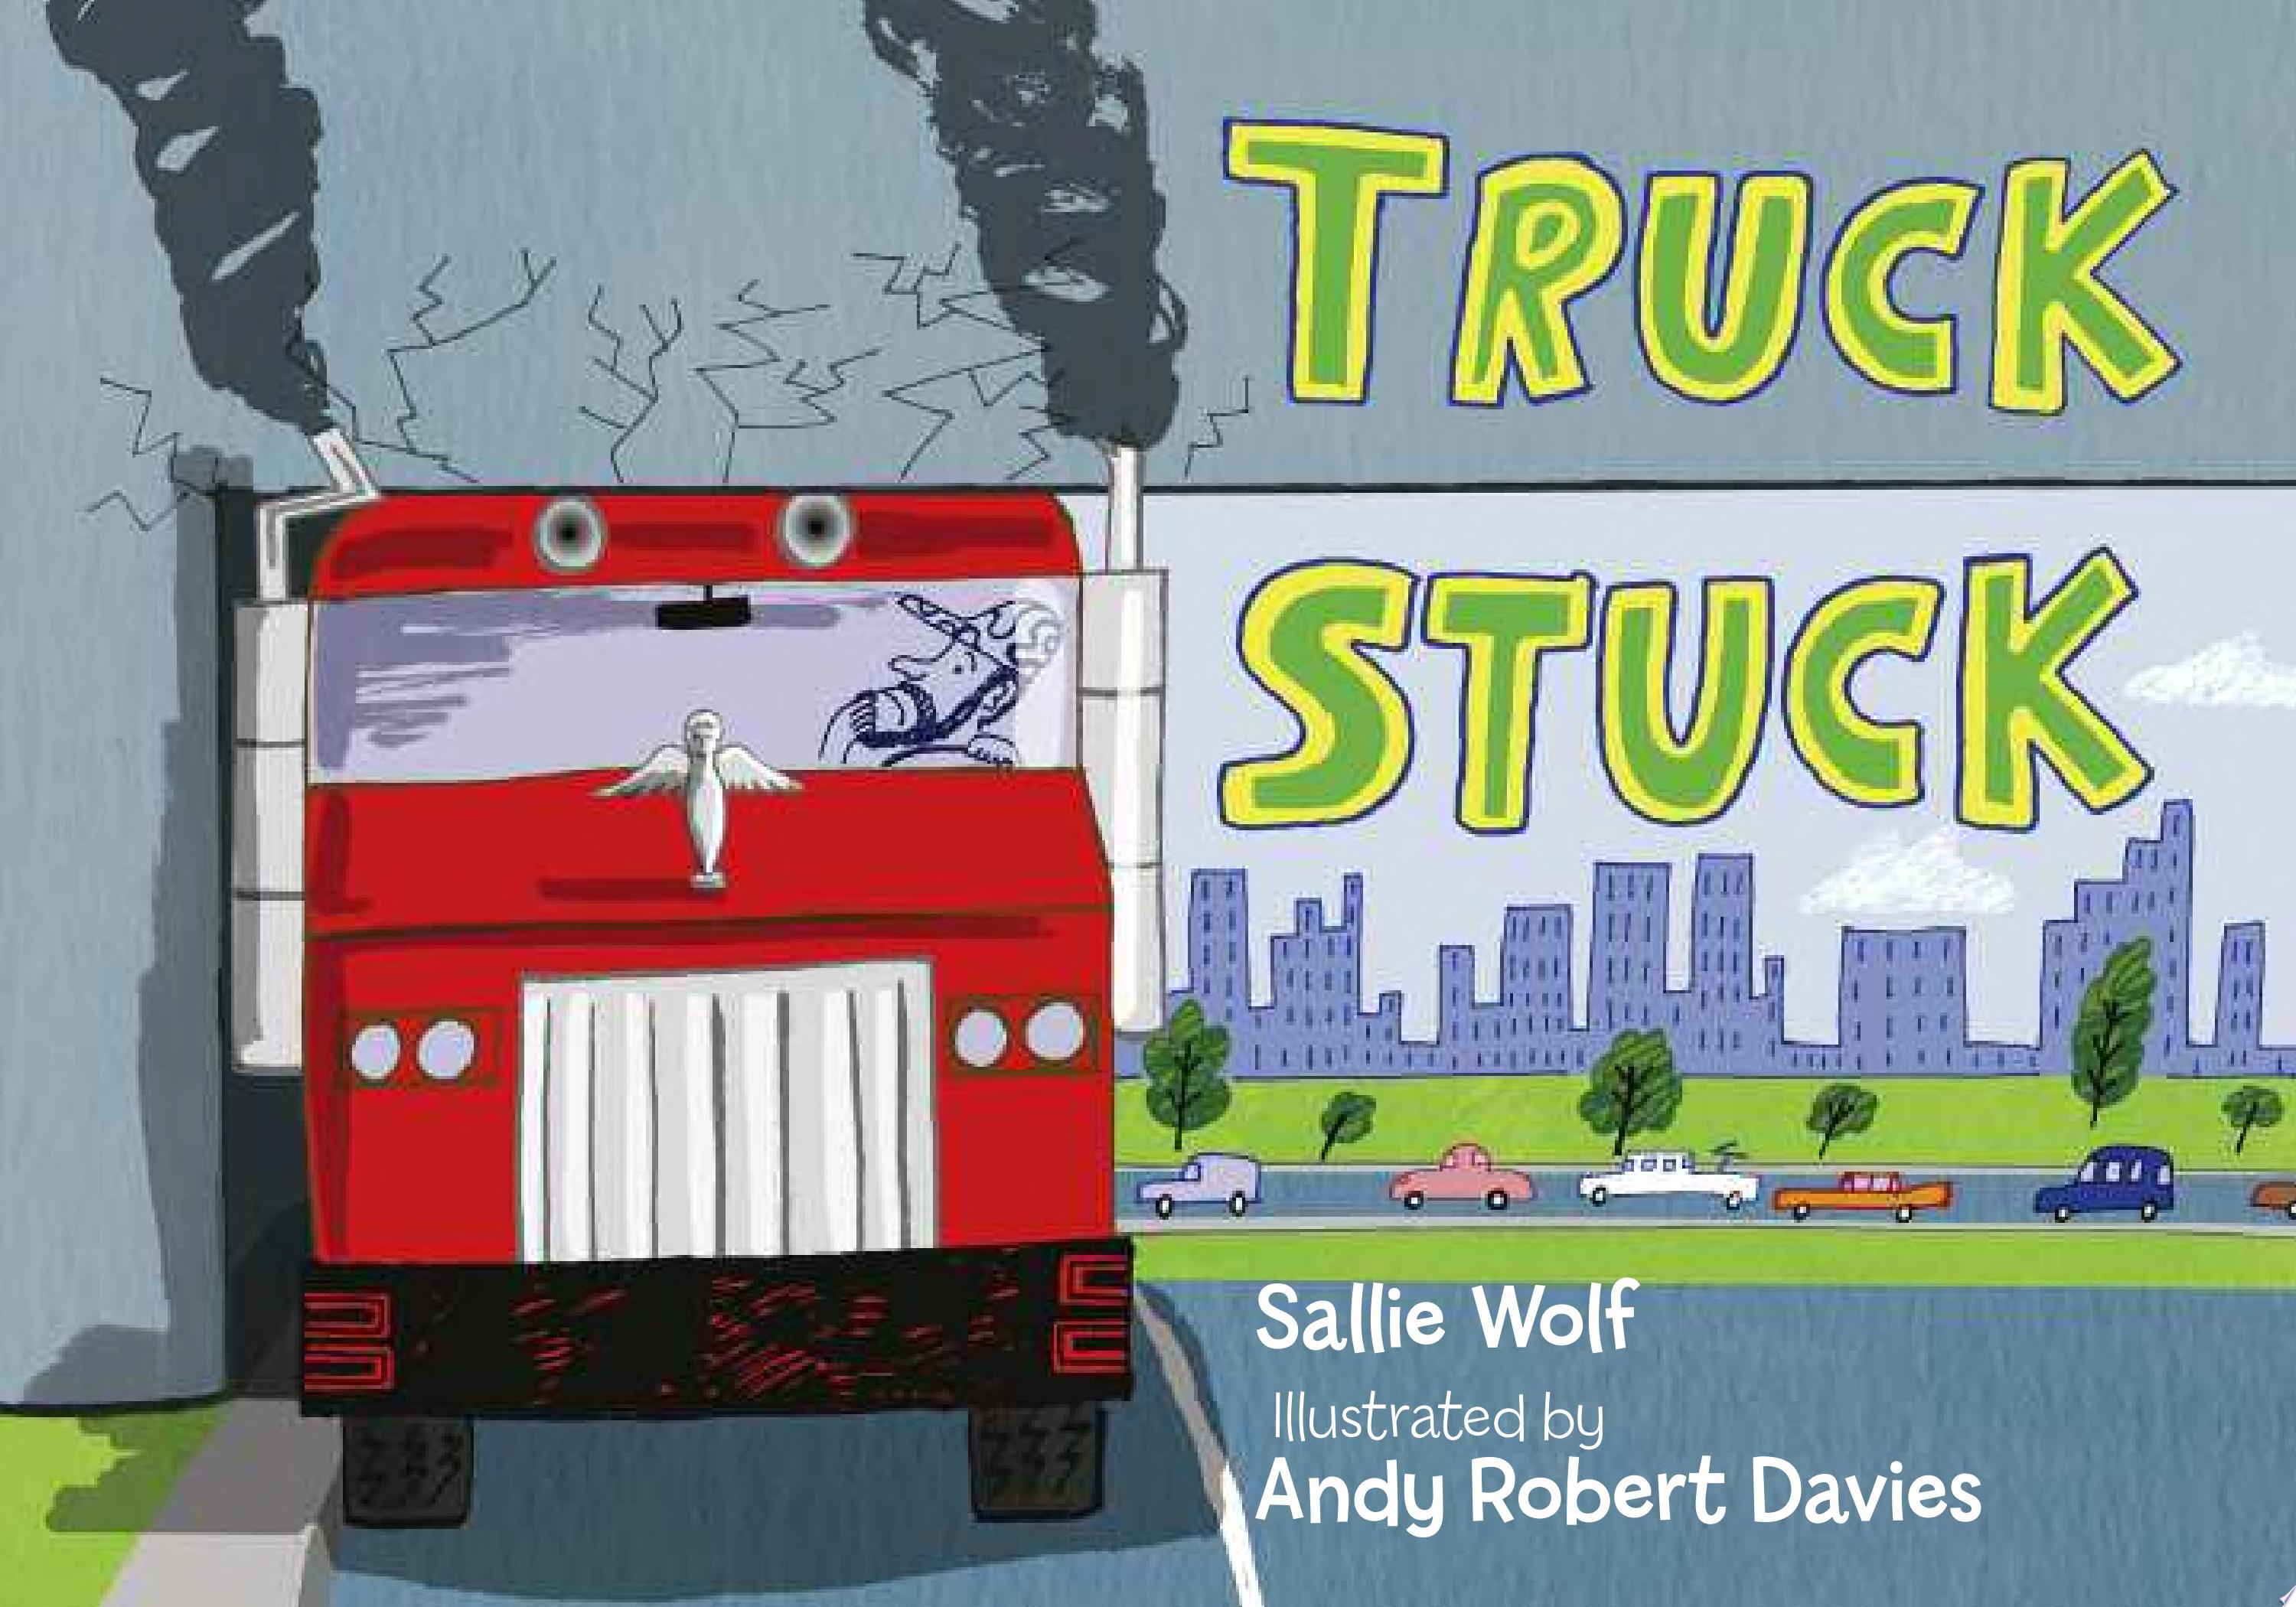 Image for "Truck Stuck"